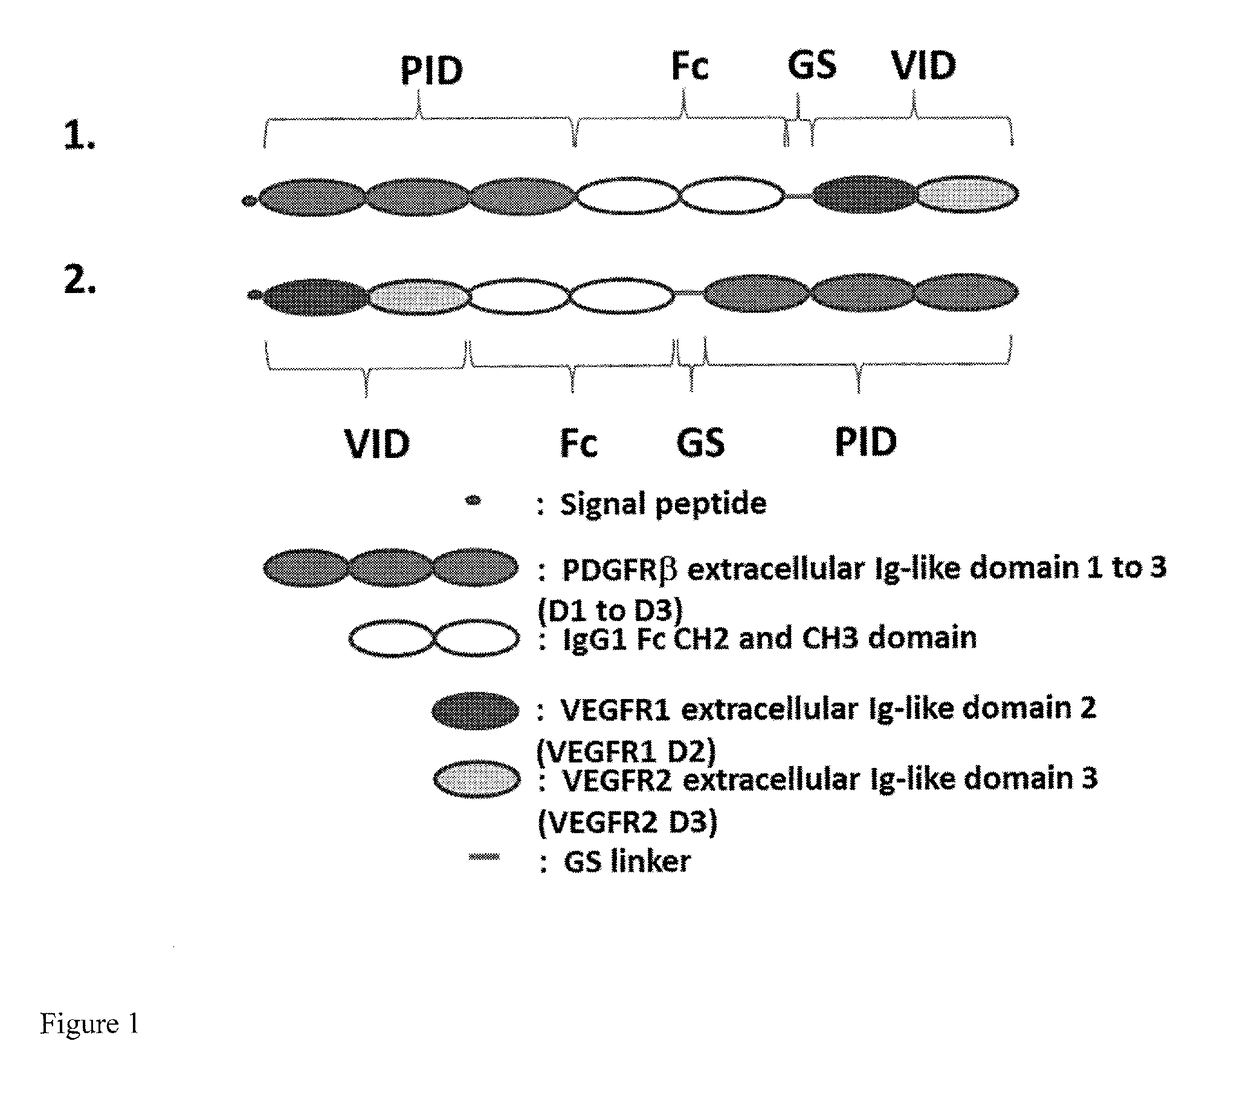 Fusion protein comprising a ligand binding domain of VEGF and pdgf